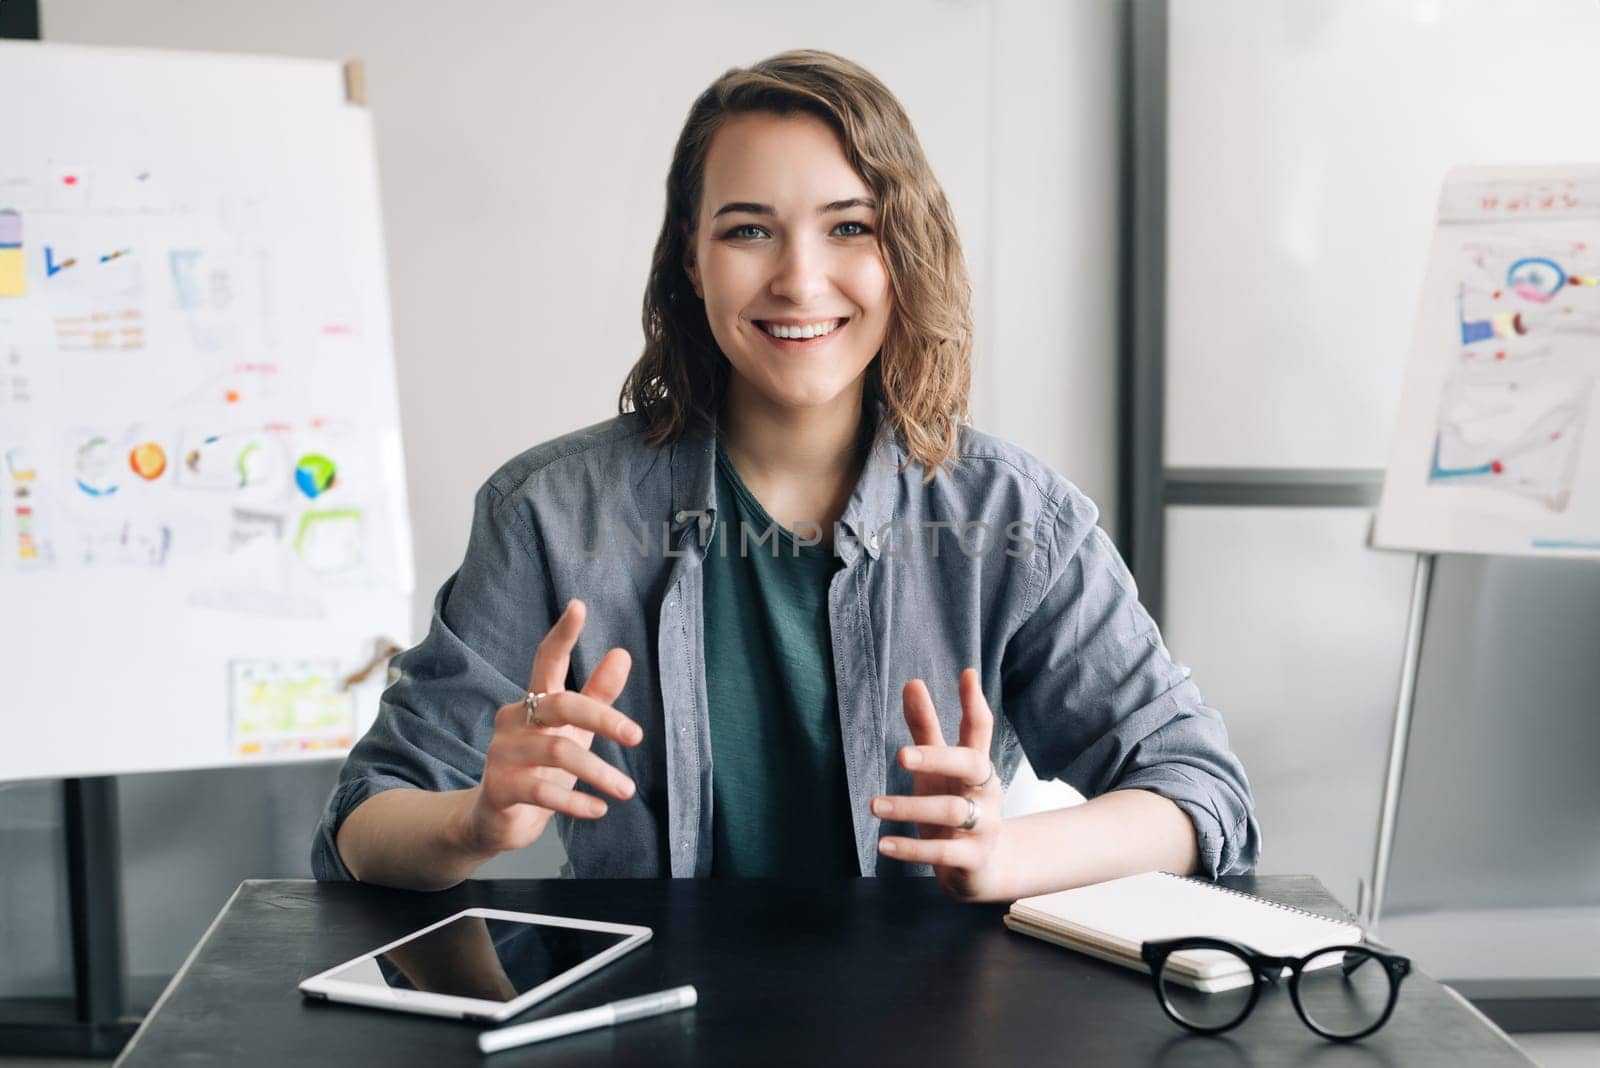 Professional and Engaging: Beautiful Business Woman Conducting a Video Conference, Communicating and Connecting with Confidence Through Web Camera, Whether in the Office or from the Comfort of Home. by ViShark